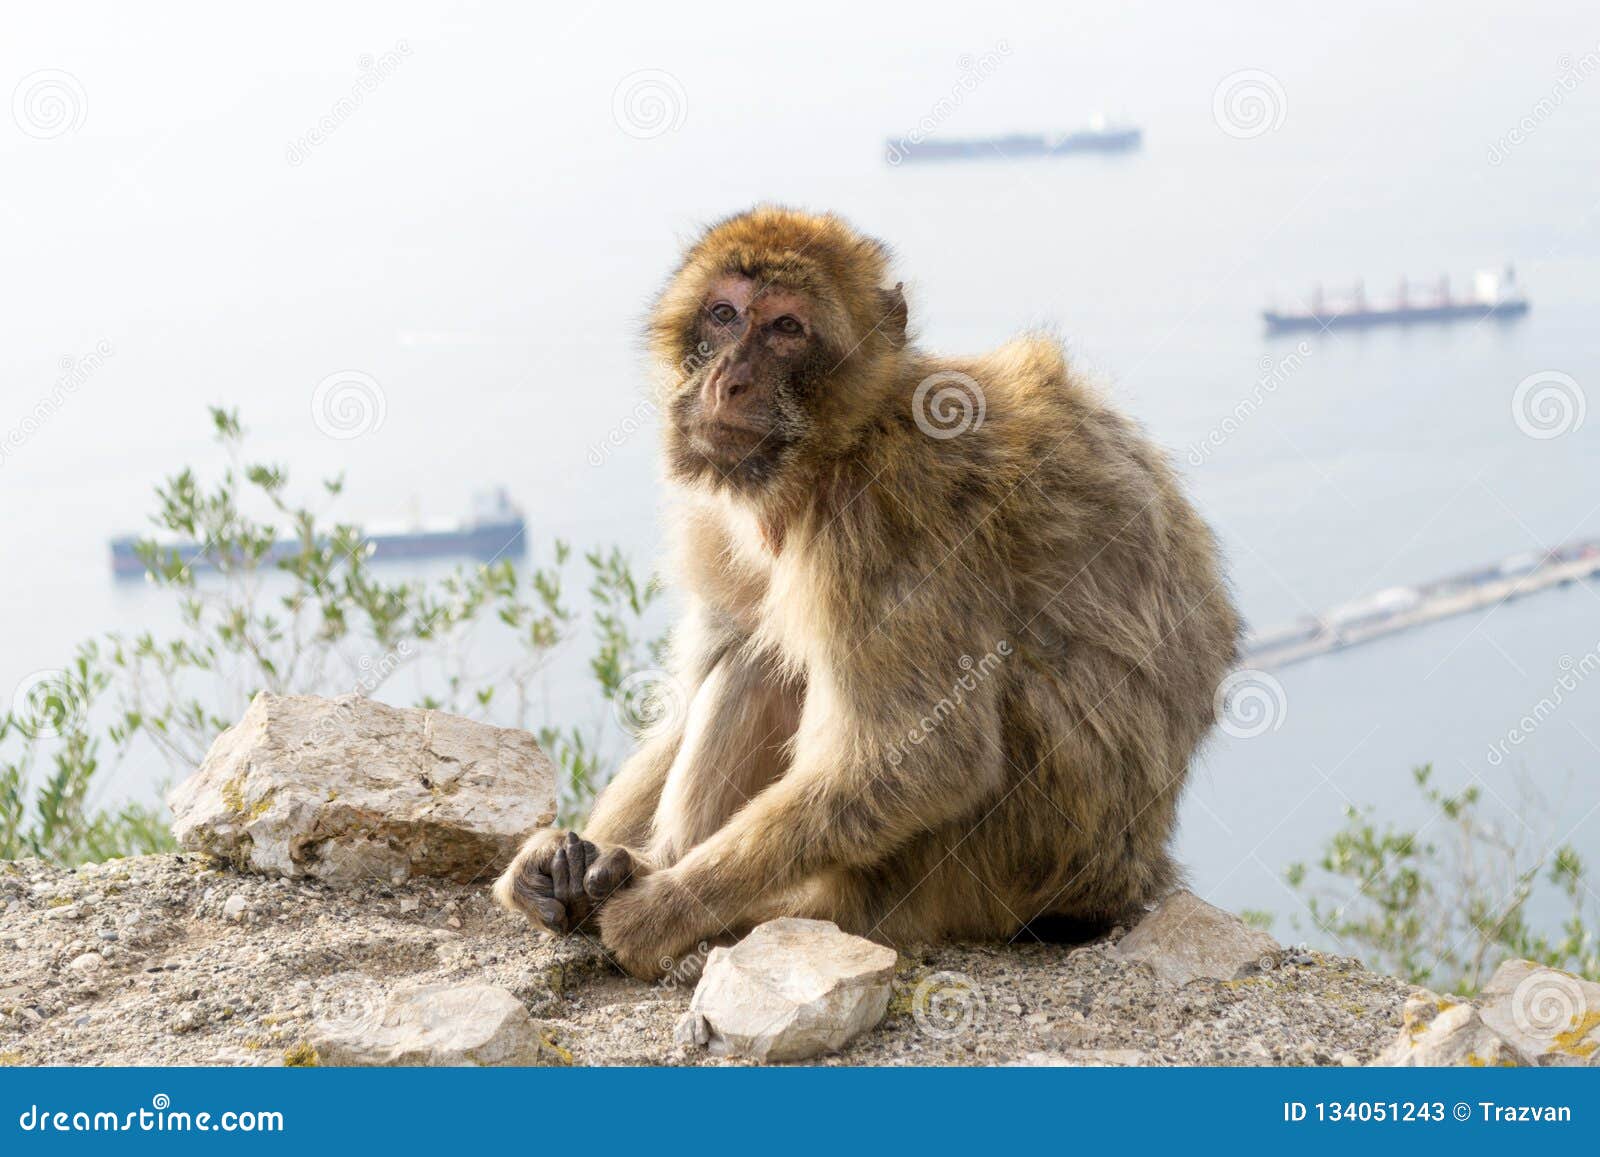 barbary macaque monkey in gibraltar